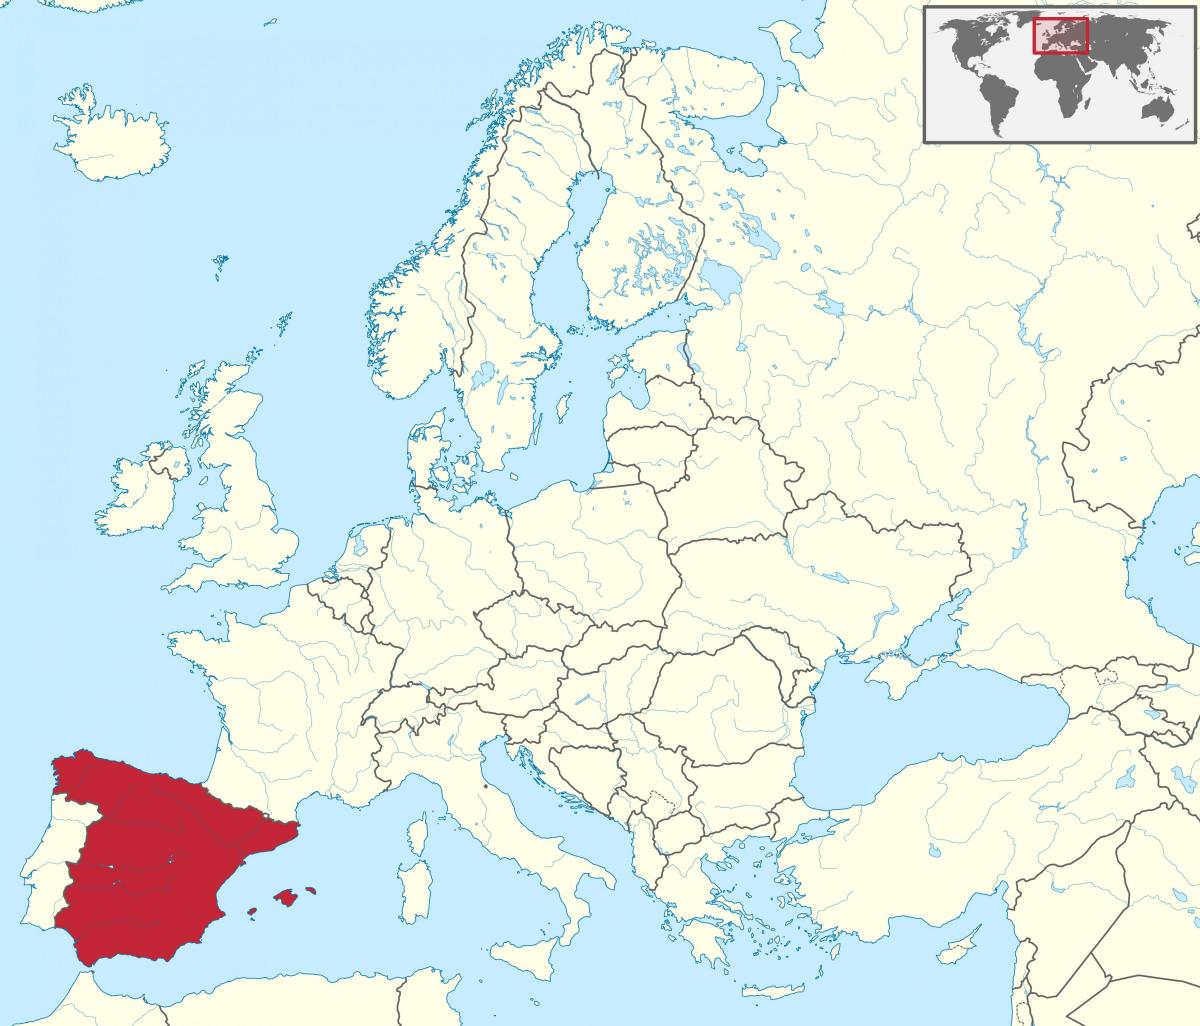 Spain location on the Europe map